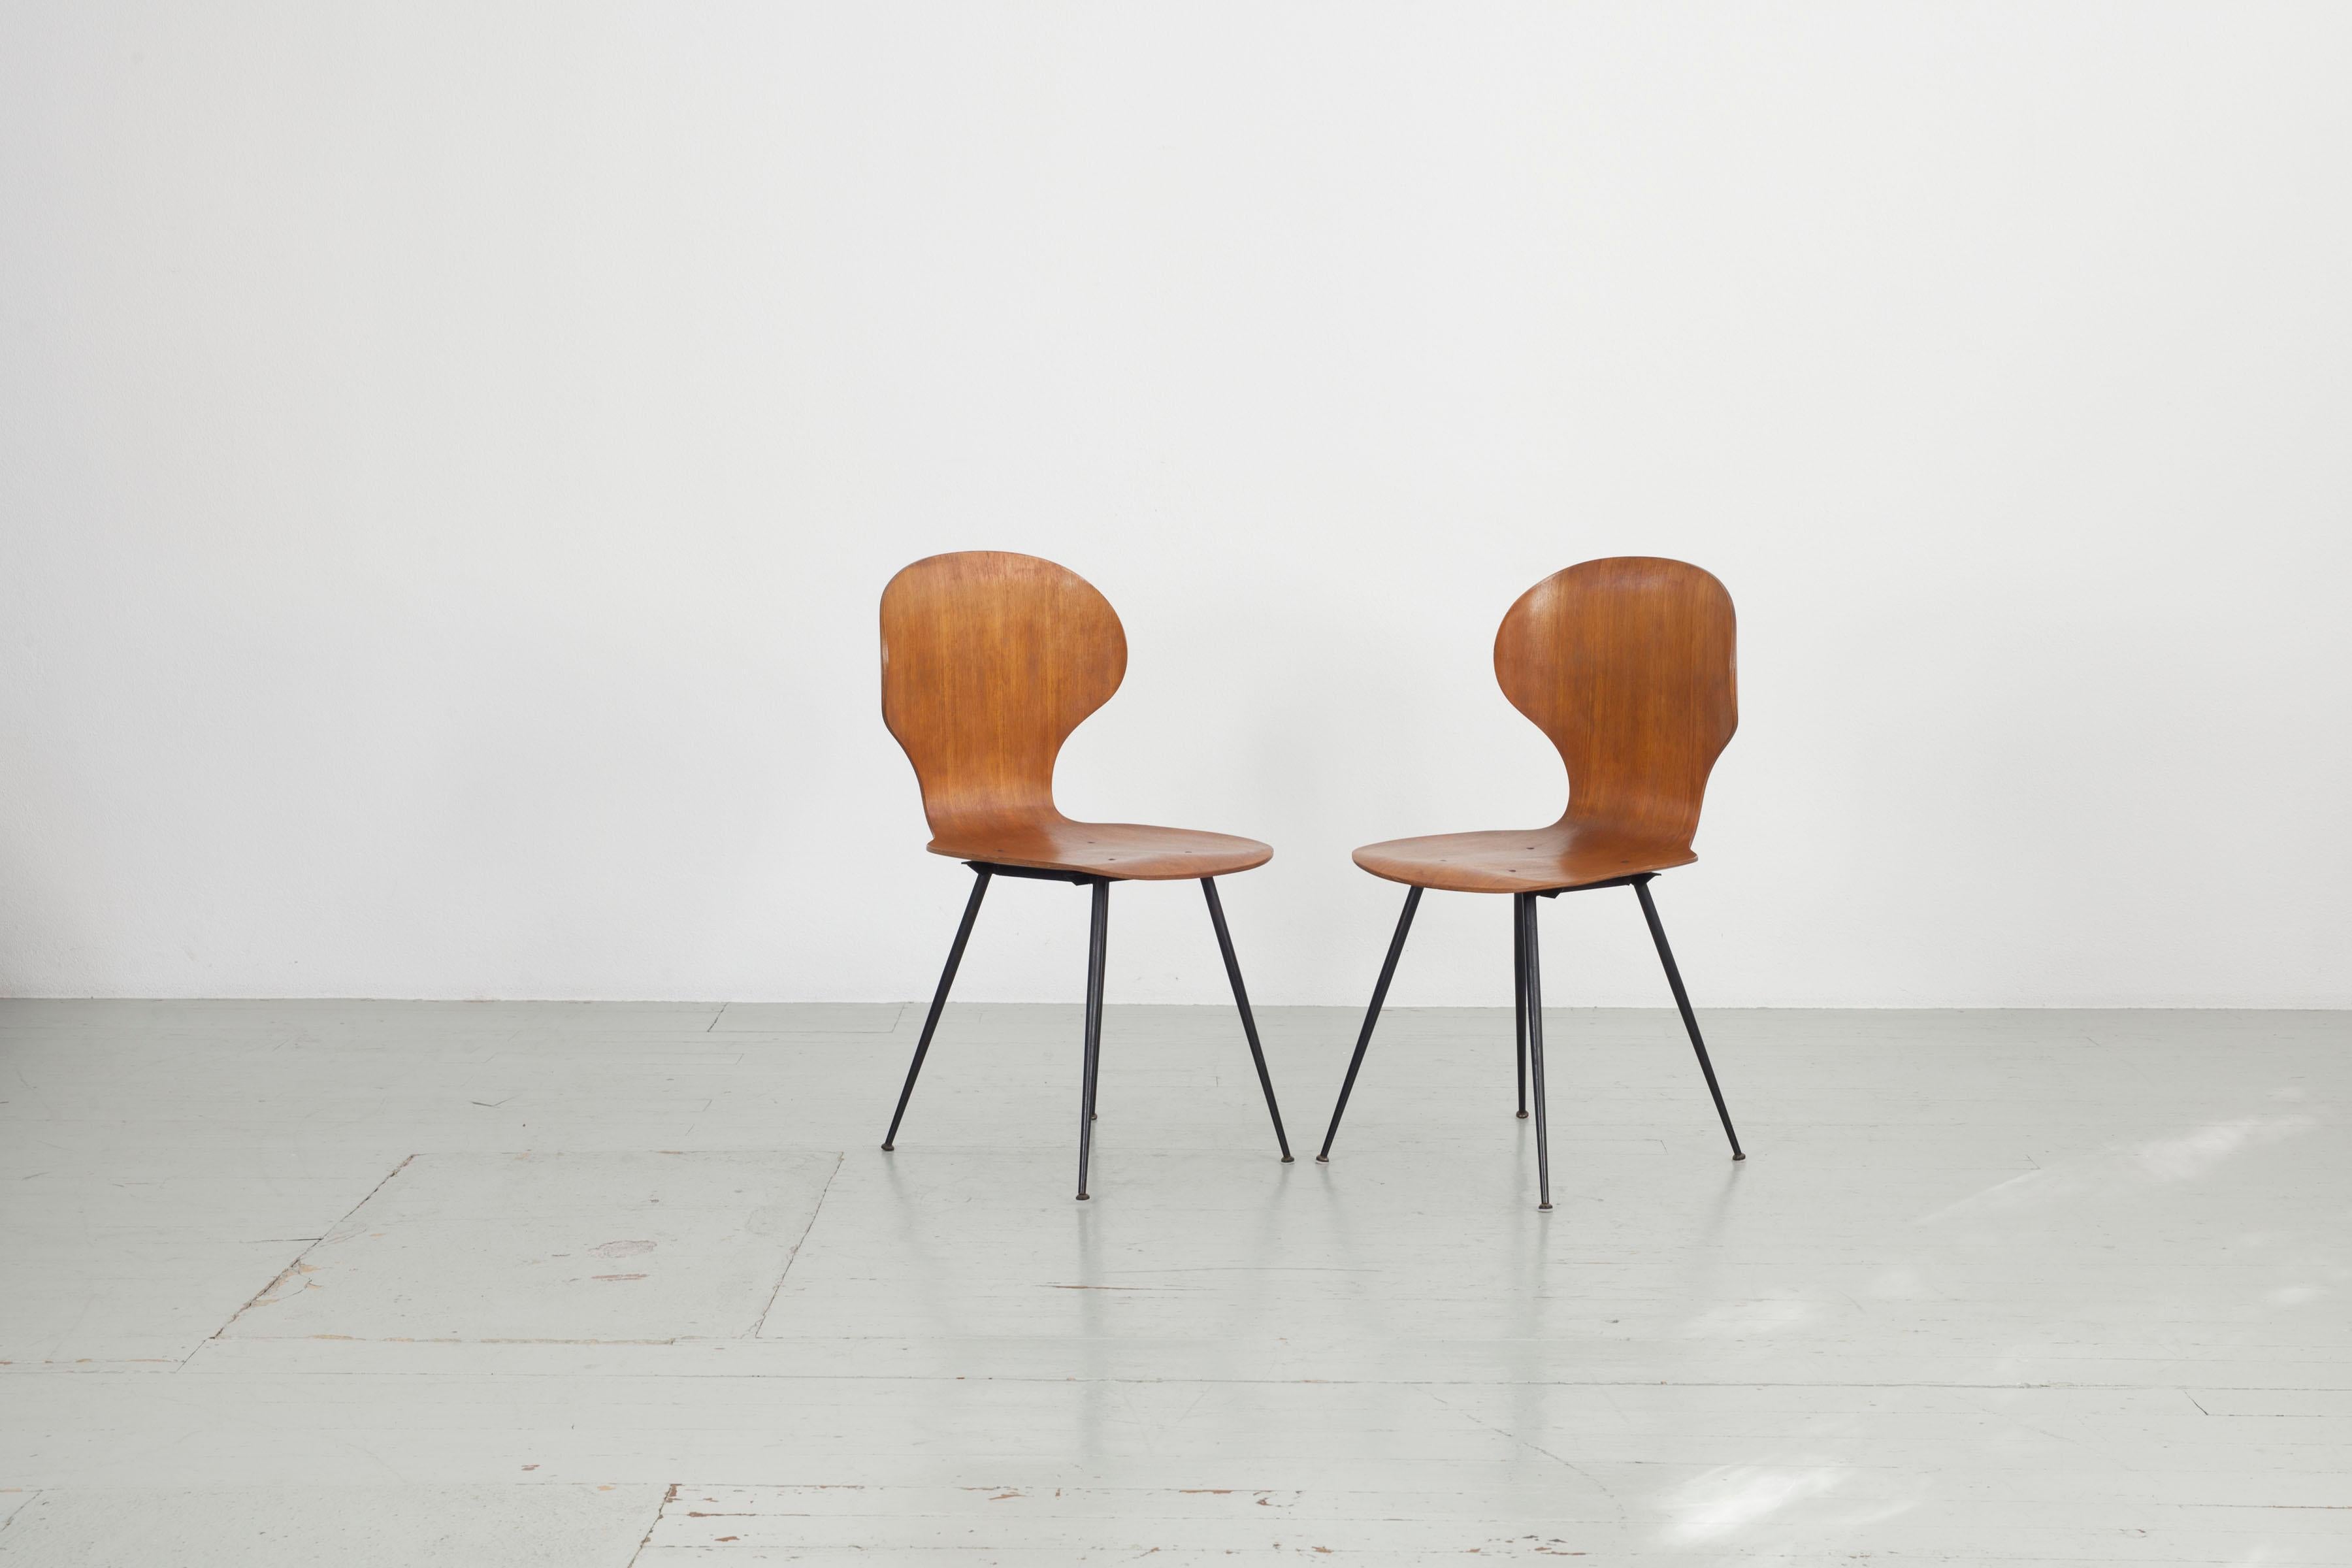 Set of 2 
This Italian chair model was designed in the 1950s by Carlo Ratti for Industira Legni Curvati Lissoni and is made of bentwood and black lacquered metal legs. The rounded shapes and thin legs give the chair elegance
You are welcome to